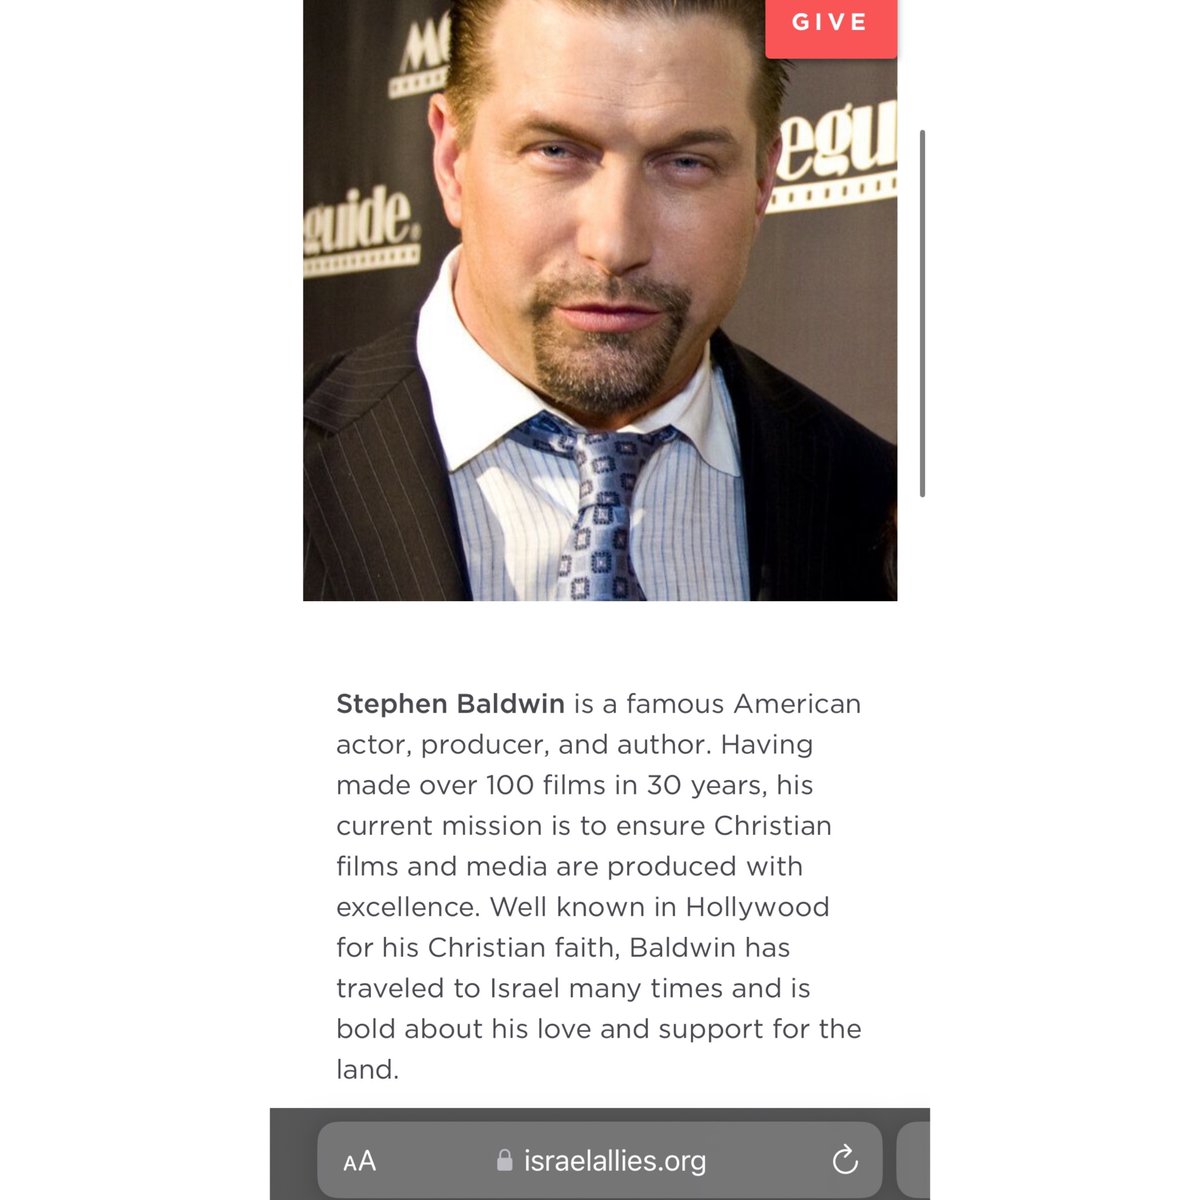 When you buy or stream The Usual Suspects, Bio-Dome, The Flintstones in Viva Rock Vegas, Nova Vita, Red Prophecies, Church People, Go West!, Streetball, Spider’s Web, you’re giving money to zionists. Stephen Baldwin is a top Christian zionist.